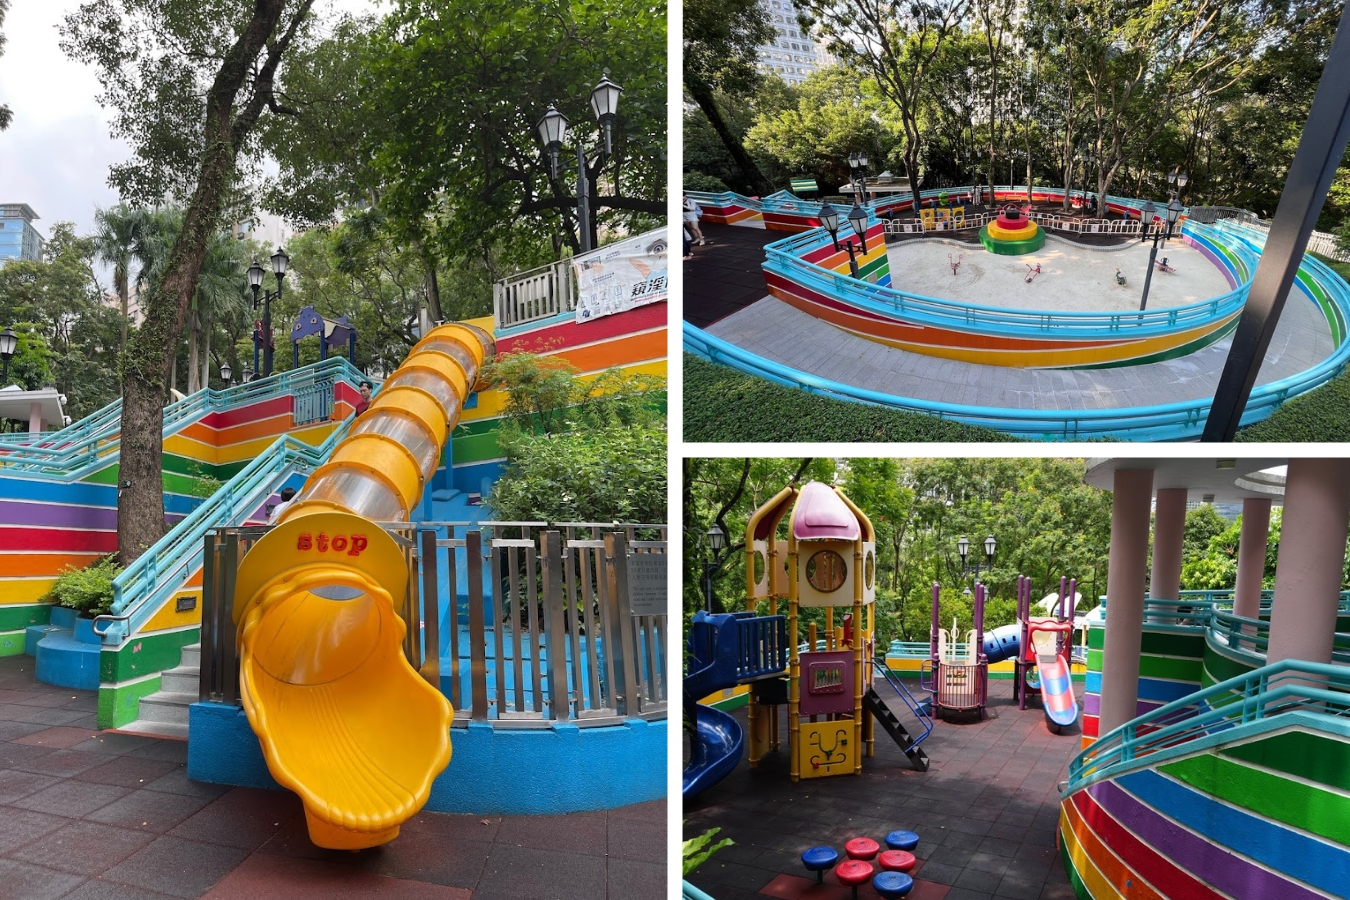 a collage showing three different images with the different play areas in hong kong park. the one on the right shows a tube slide, the upper right one shows a sand pit, and the lower right one shows the different slides in the playground.